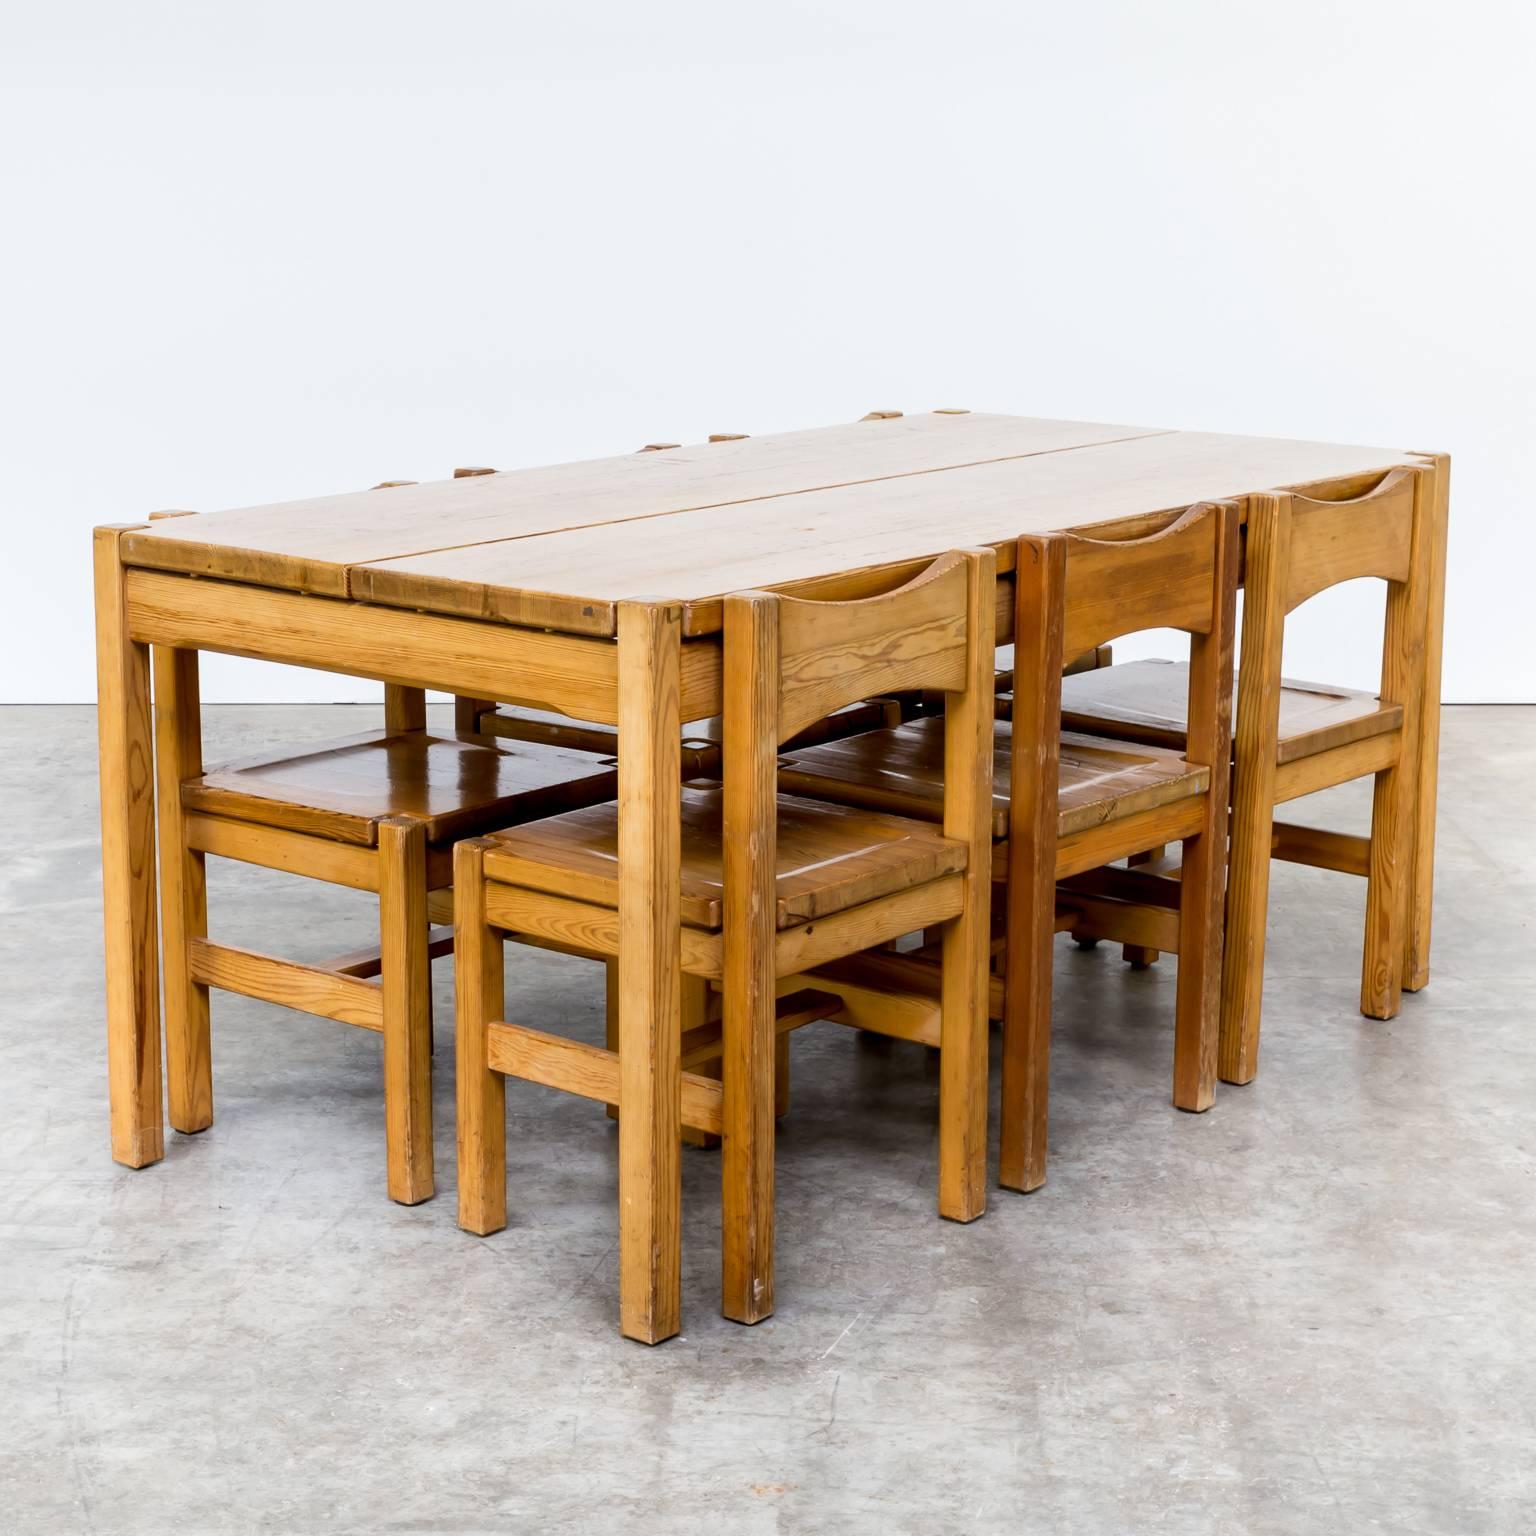 One set of Ilmari Tapiovaara pine wood dinner set one table and six chairs for Laukaan Puu, Hongisto serie 3000. Nice and complete dining room set. Beautiful patina through age and minor usage spurs. Dimensions: Table 160cm (W) x 80.5cm (D) x 72cm